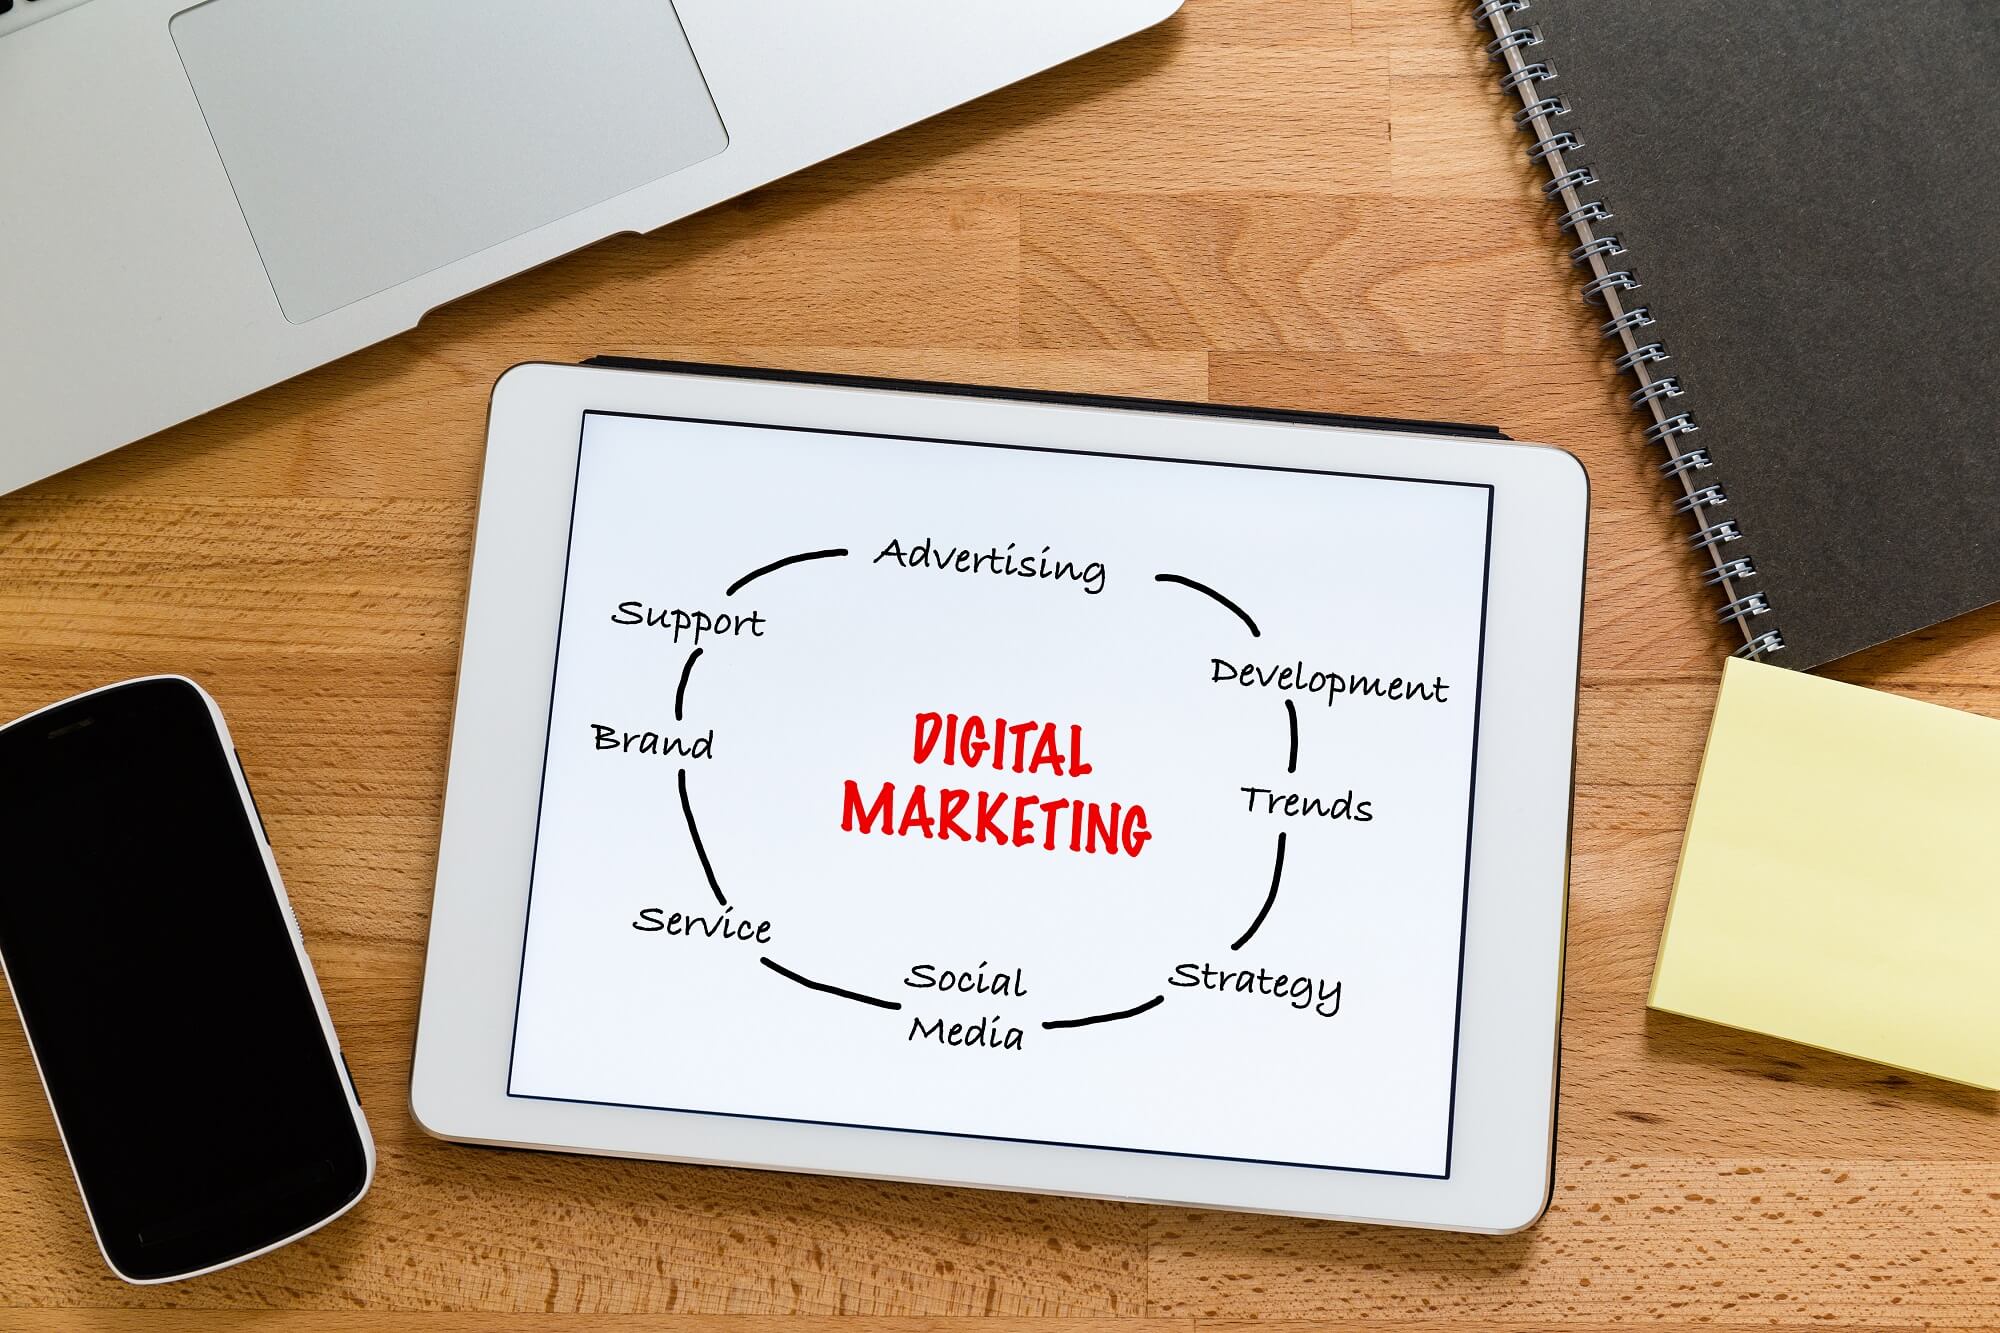 How to promote business through digital marketing 